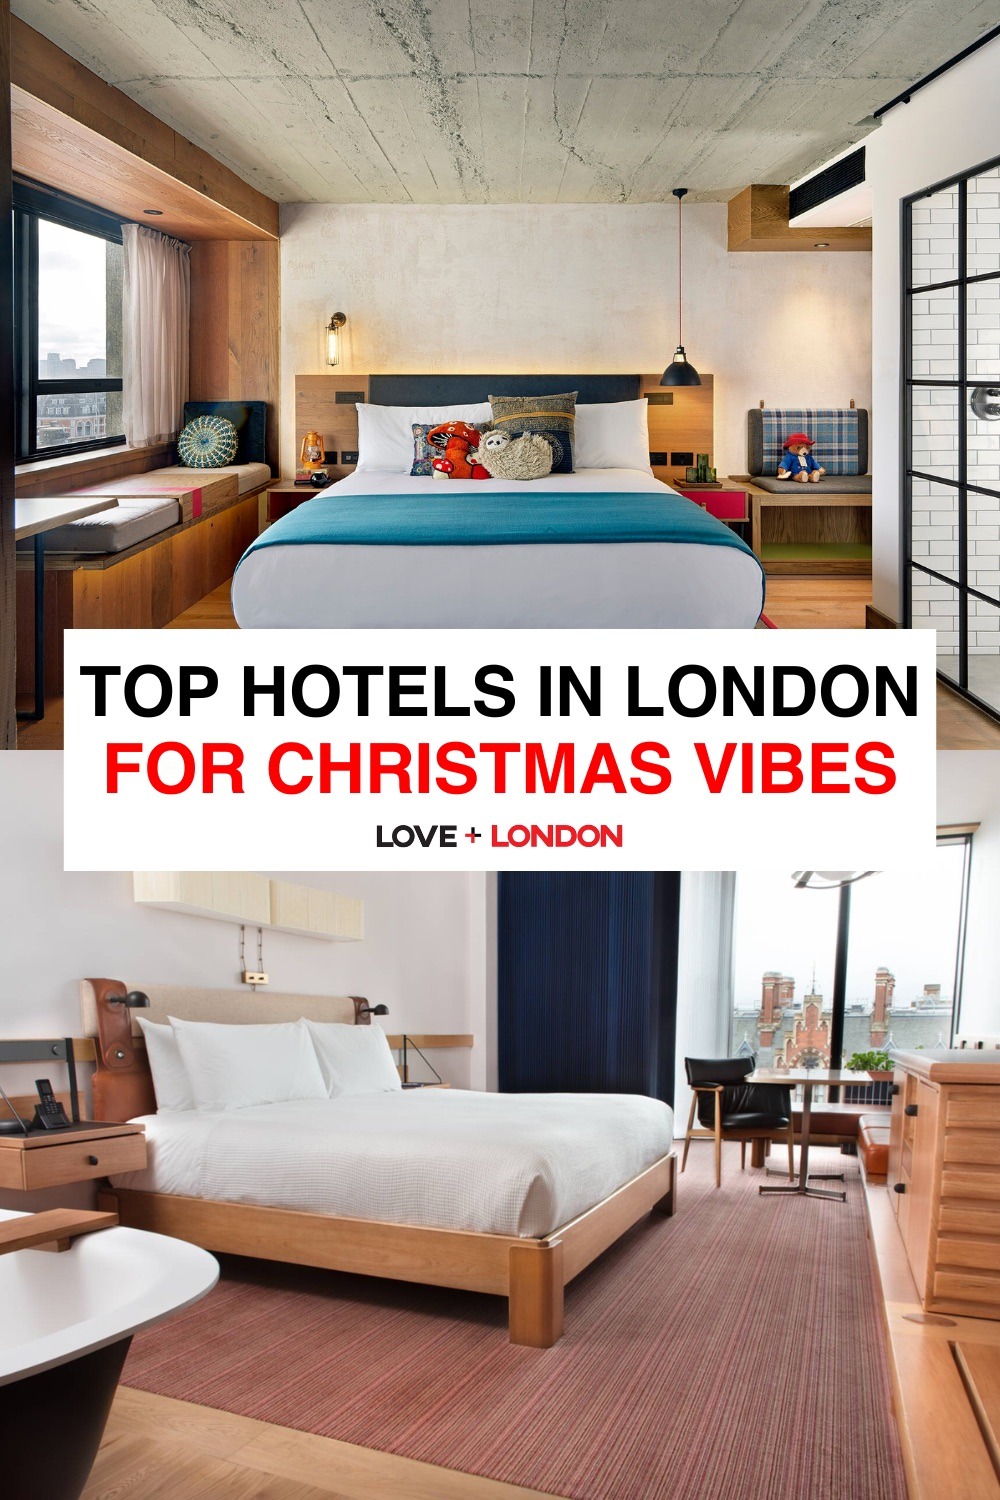 Top Hotels to Stay at in London for Christmas Vibes